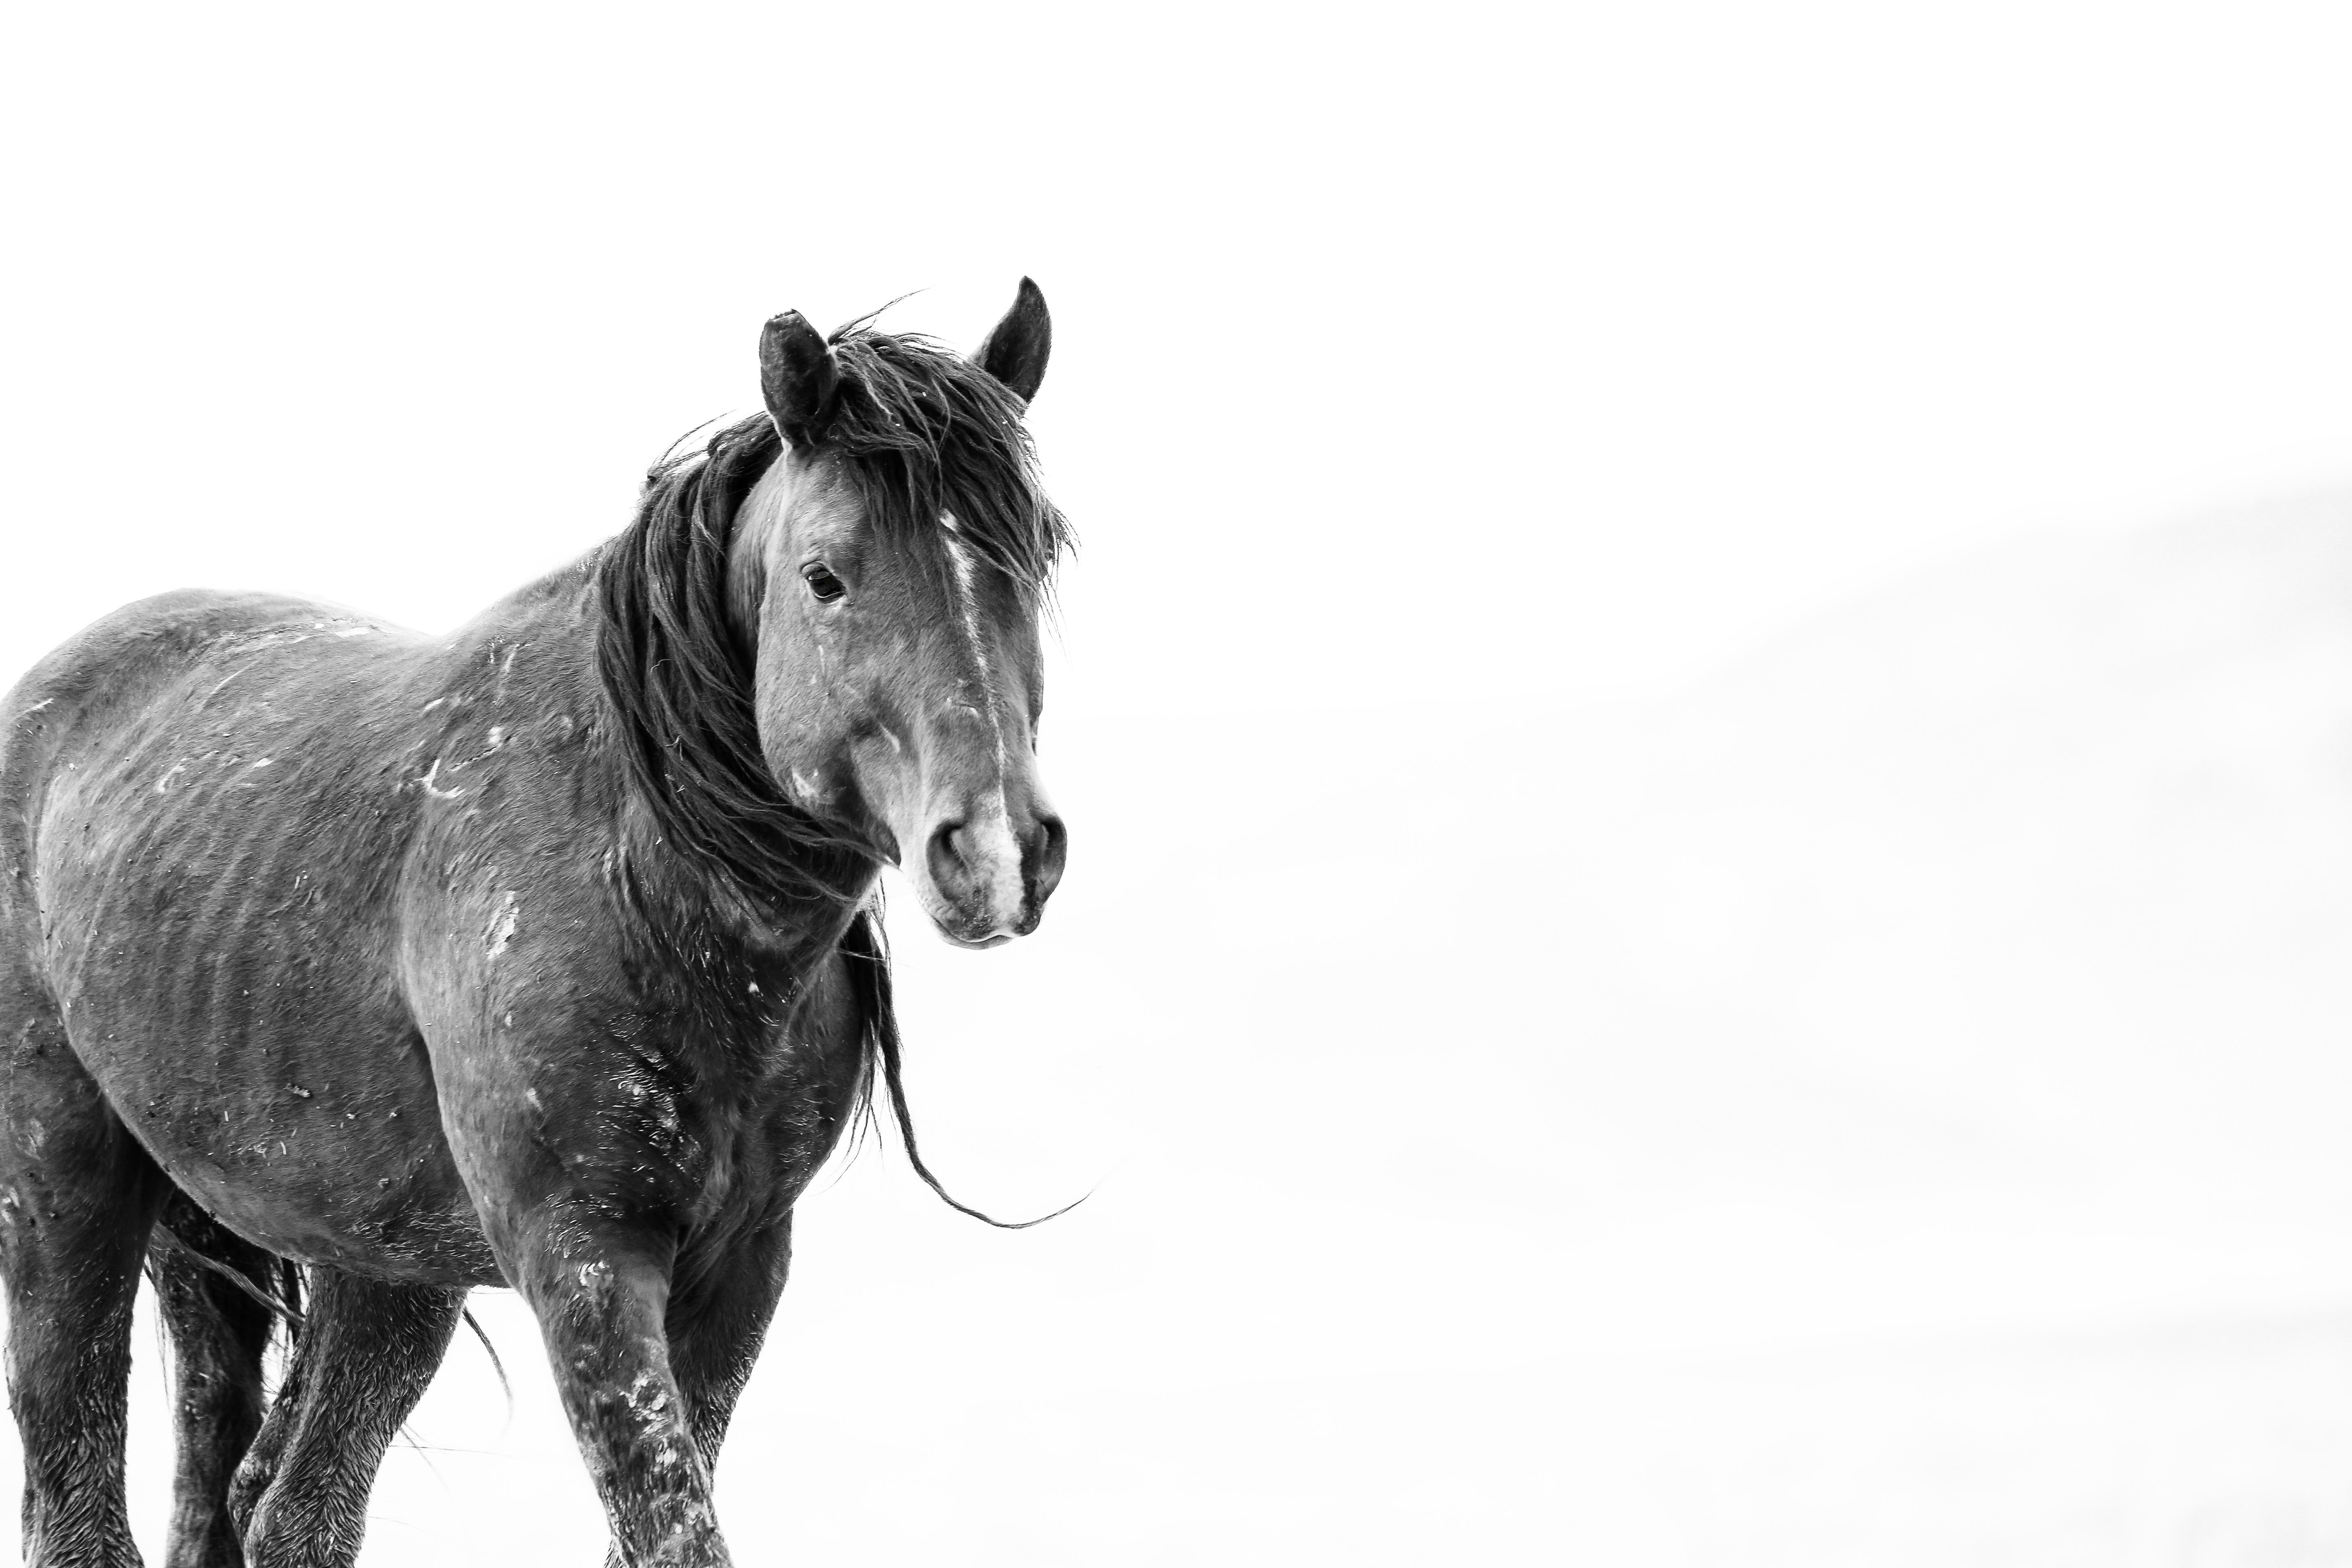 Shane Russeck Black and White Photograph - SOLO 40x60  Black & White Photography, Wild Horses Mustang Fine Art Unsiged